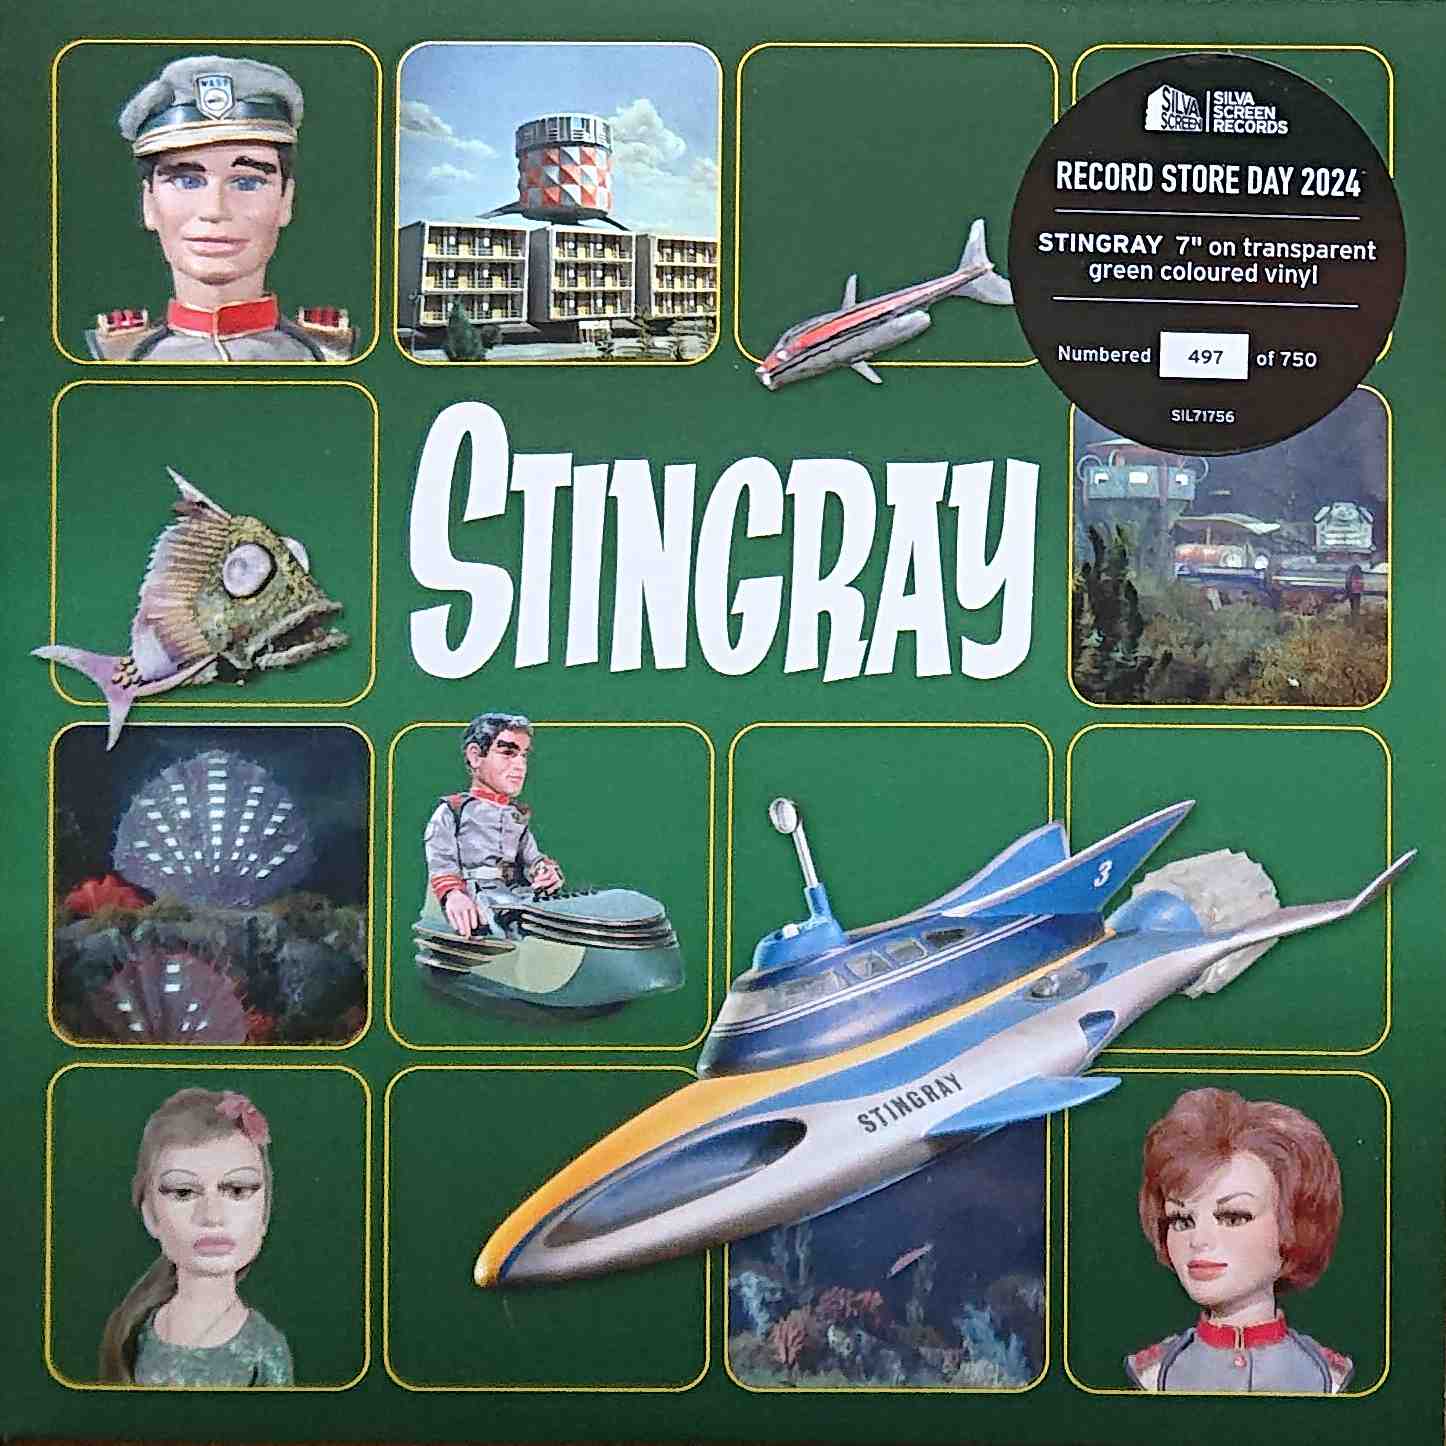 Picture of Stingray by artist The Barry Gray Orchestra from ITV, Channel 4 and Channel 5 singles library